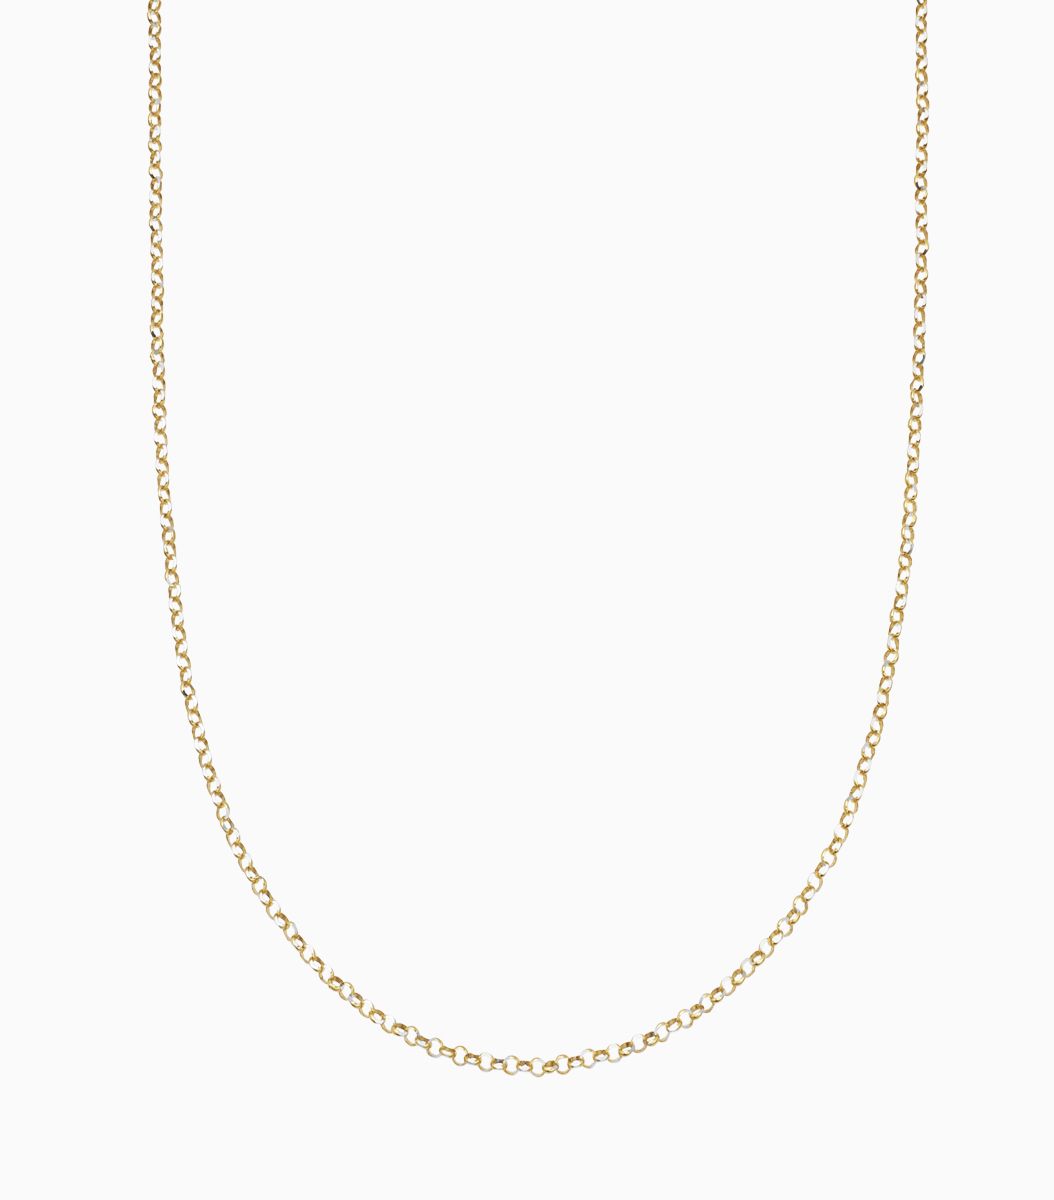 Yellow Gold Rolo Chain - 18 inch - 9k